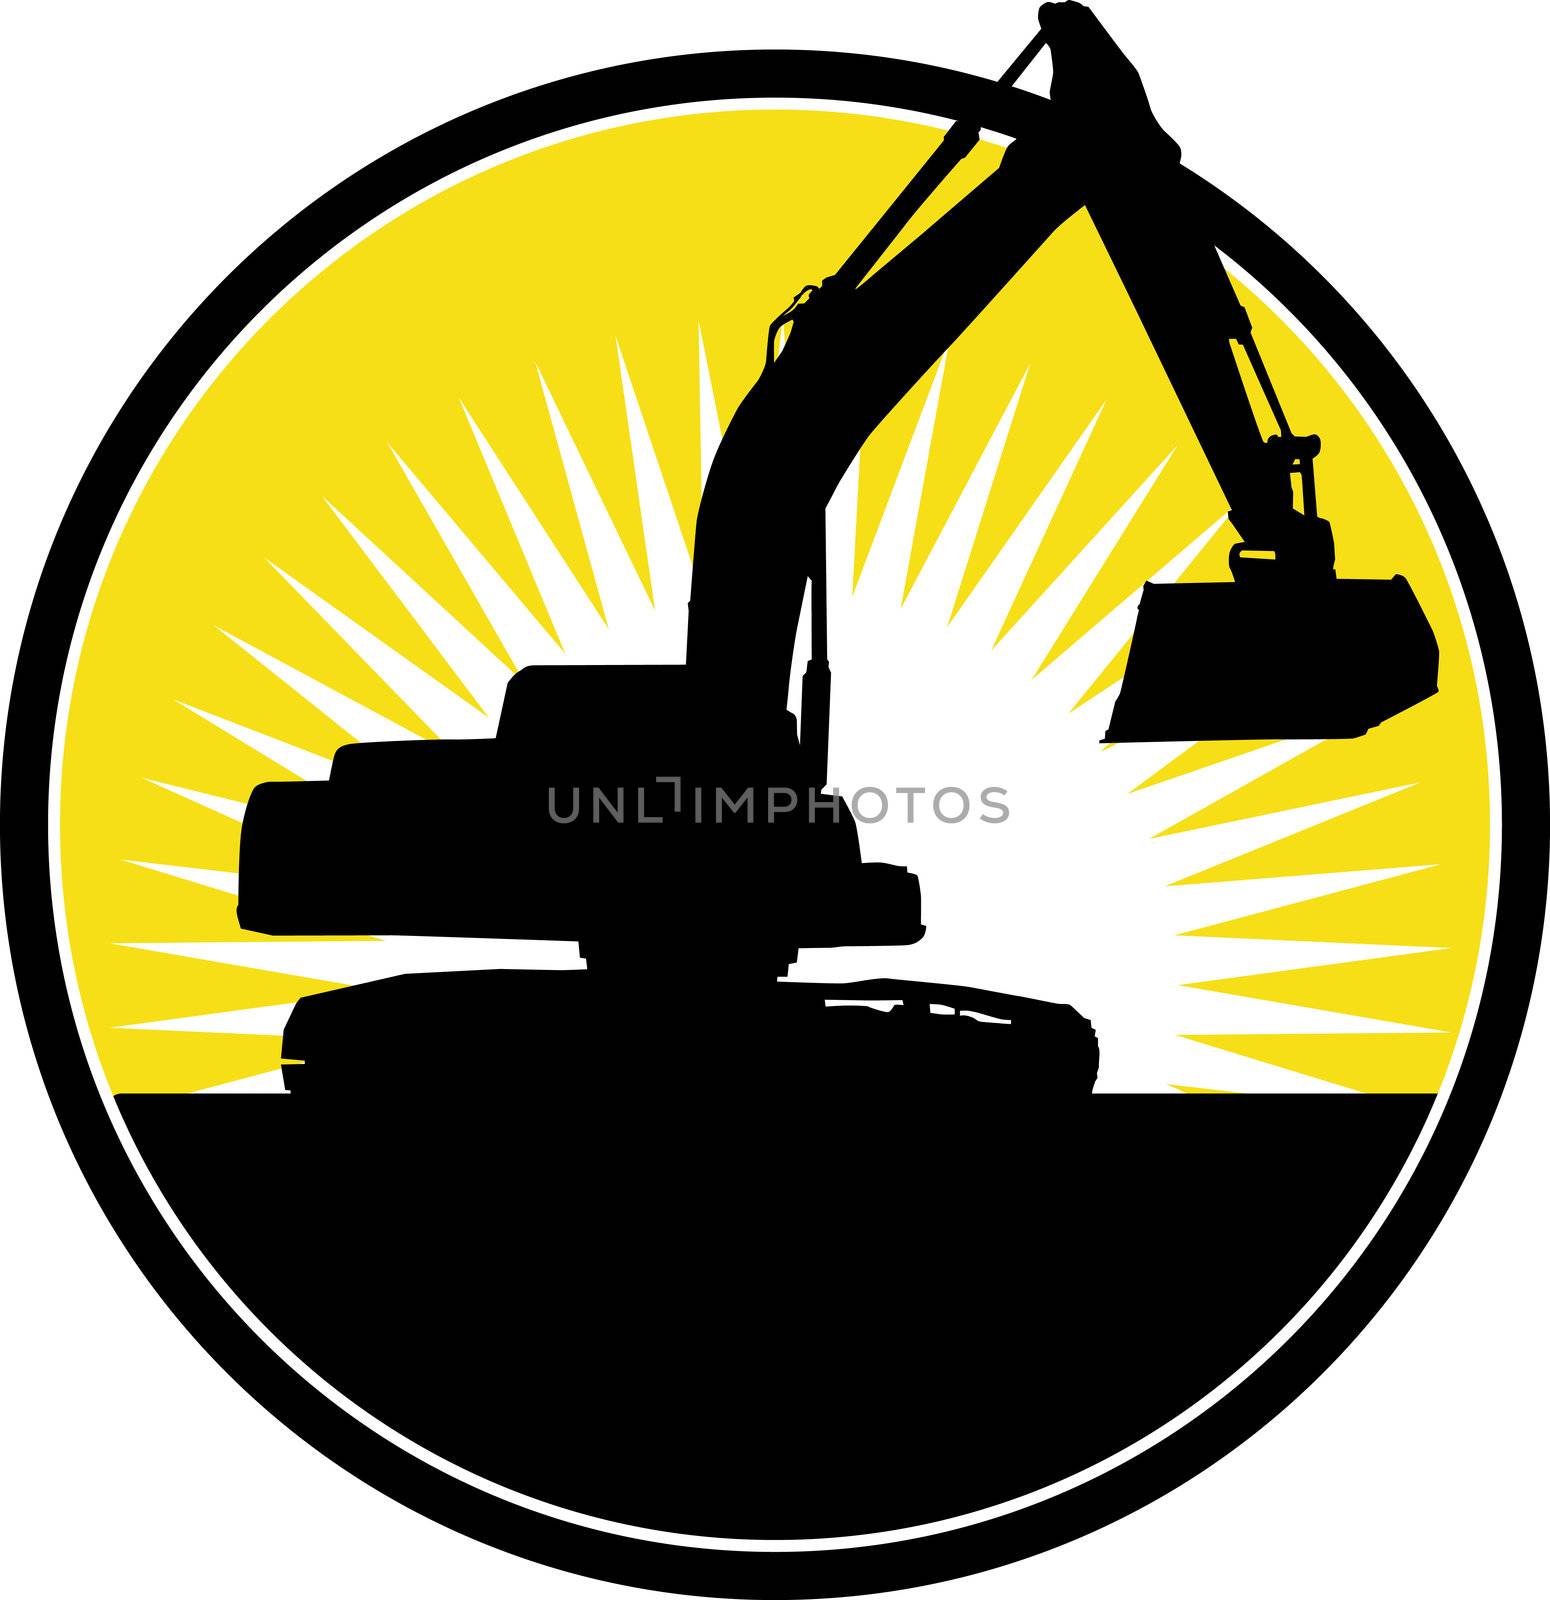 illustration of a Mechanical Digger with sunburst in background